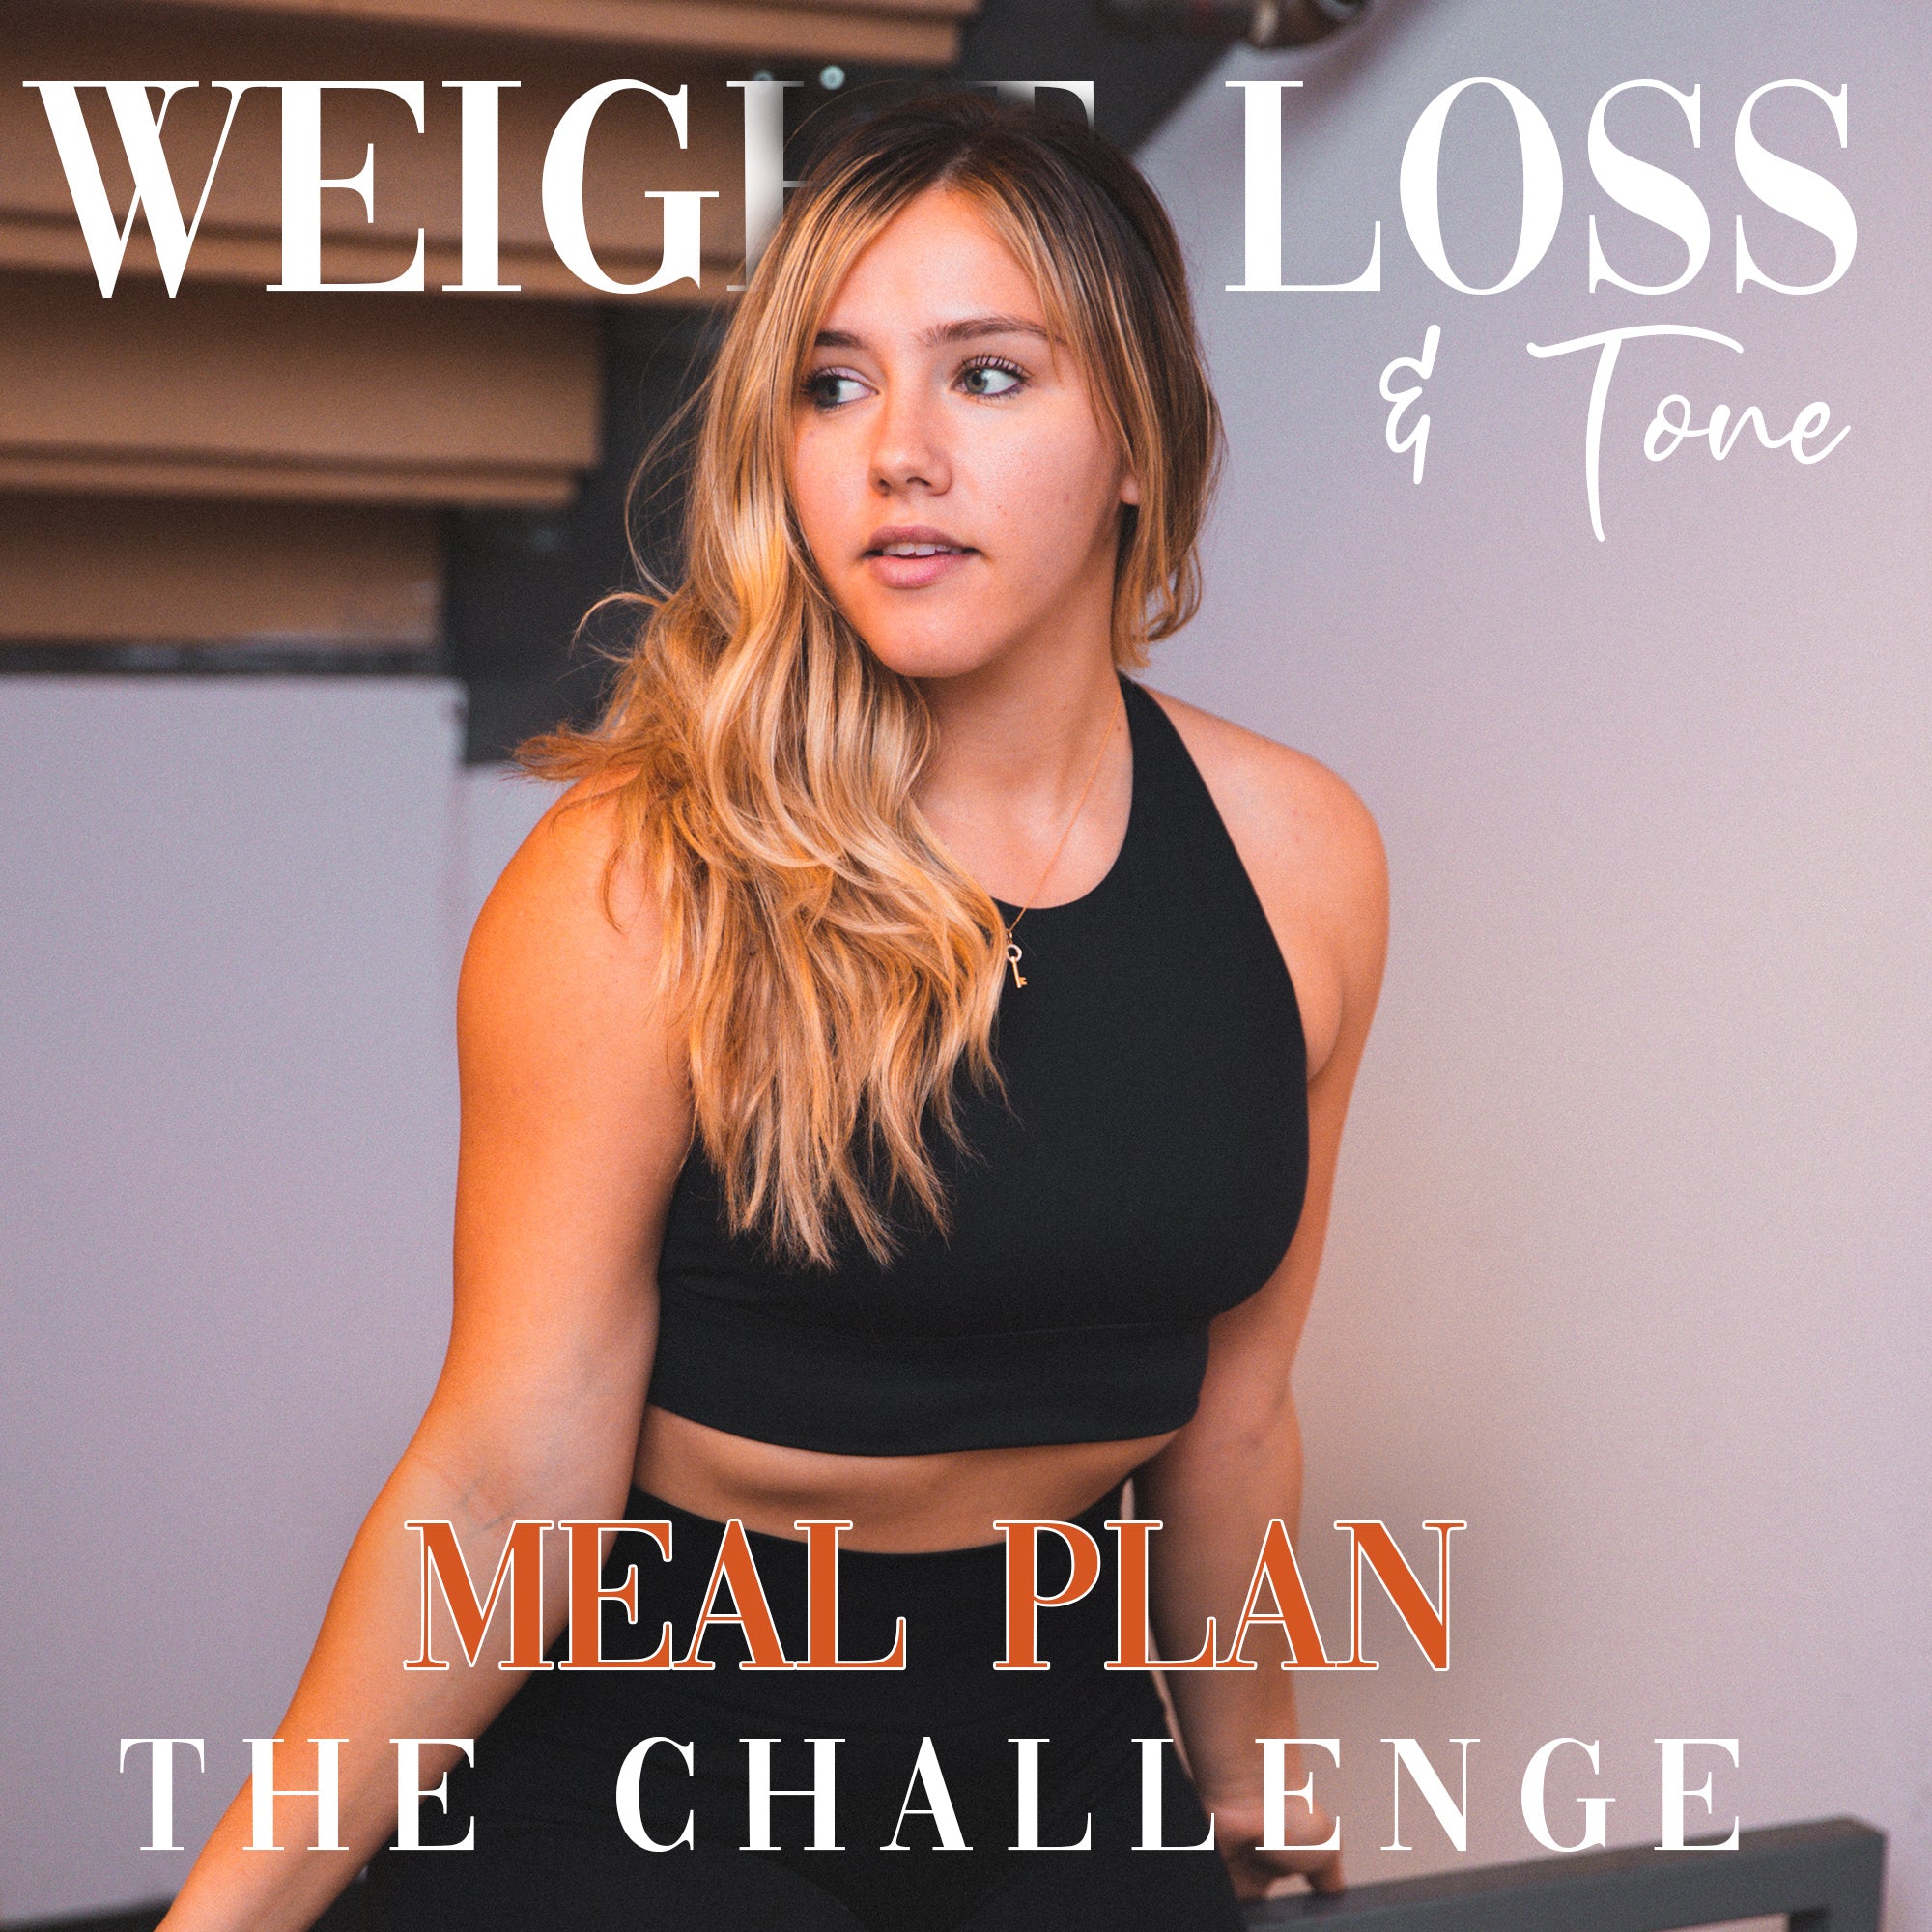 Weight Loss & Tone Challenge: Meal Plan